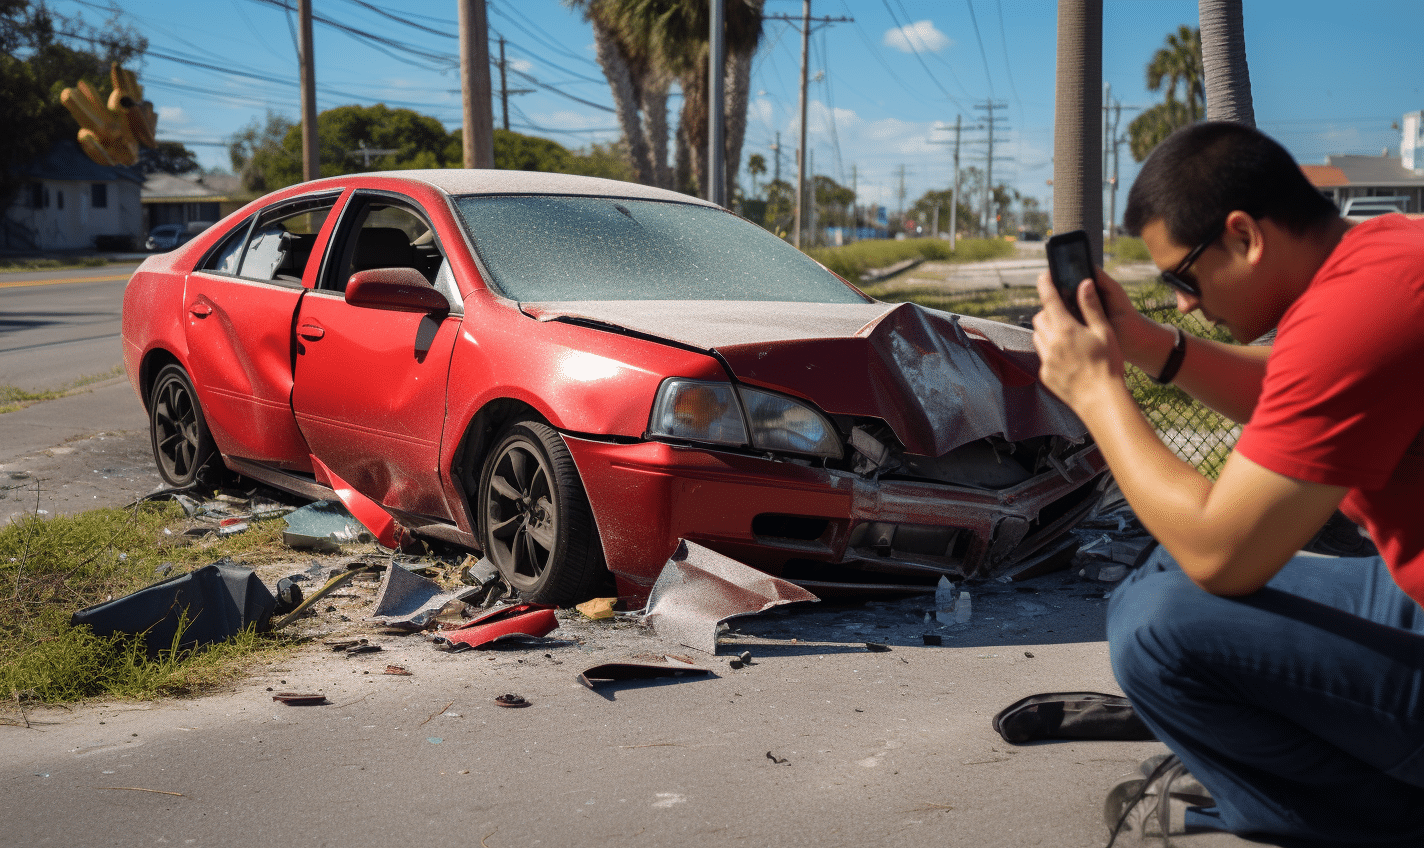 west palm beach car accident lawyer document and gather evidence